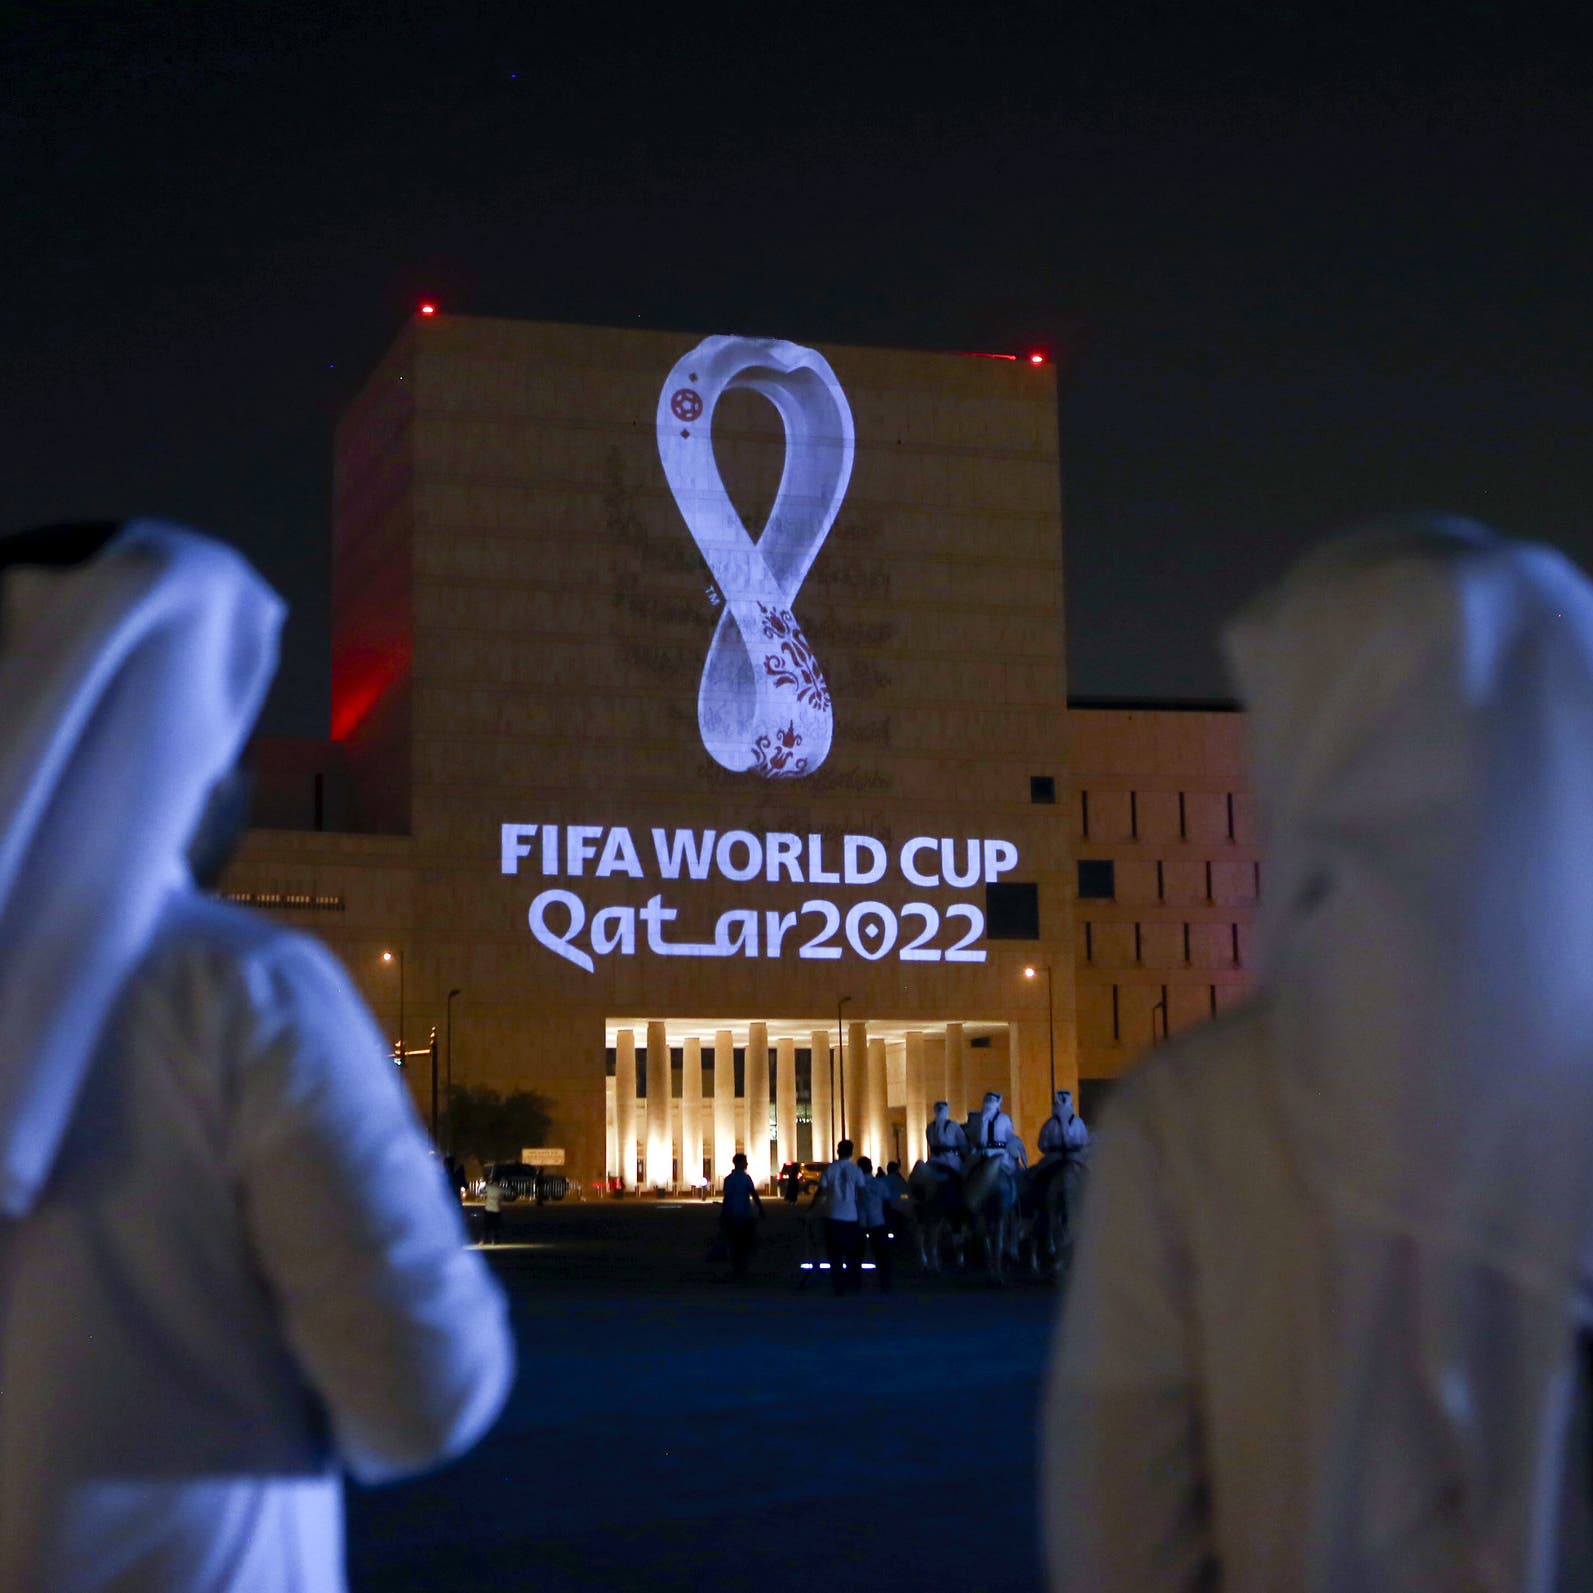 Surge in online scams, hacks expected ahead of FIFA World Cup, expert warns